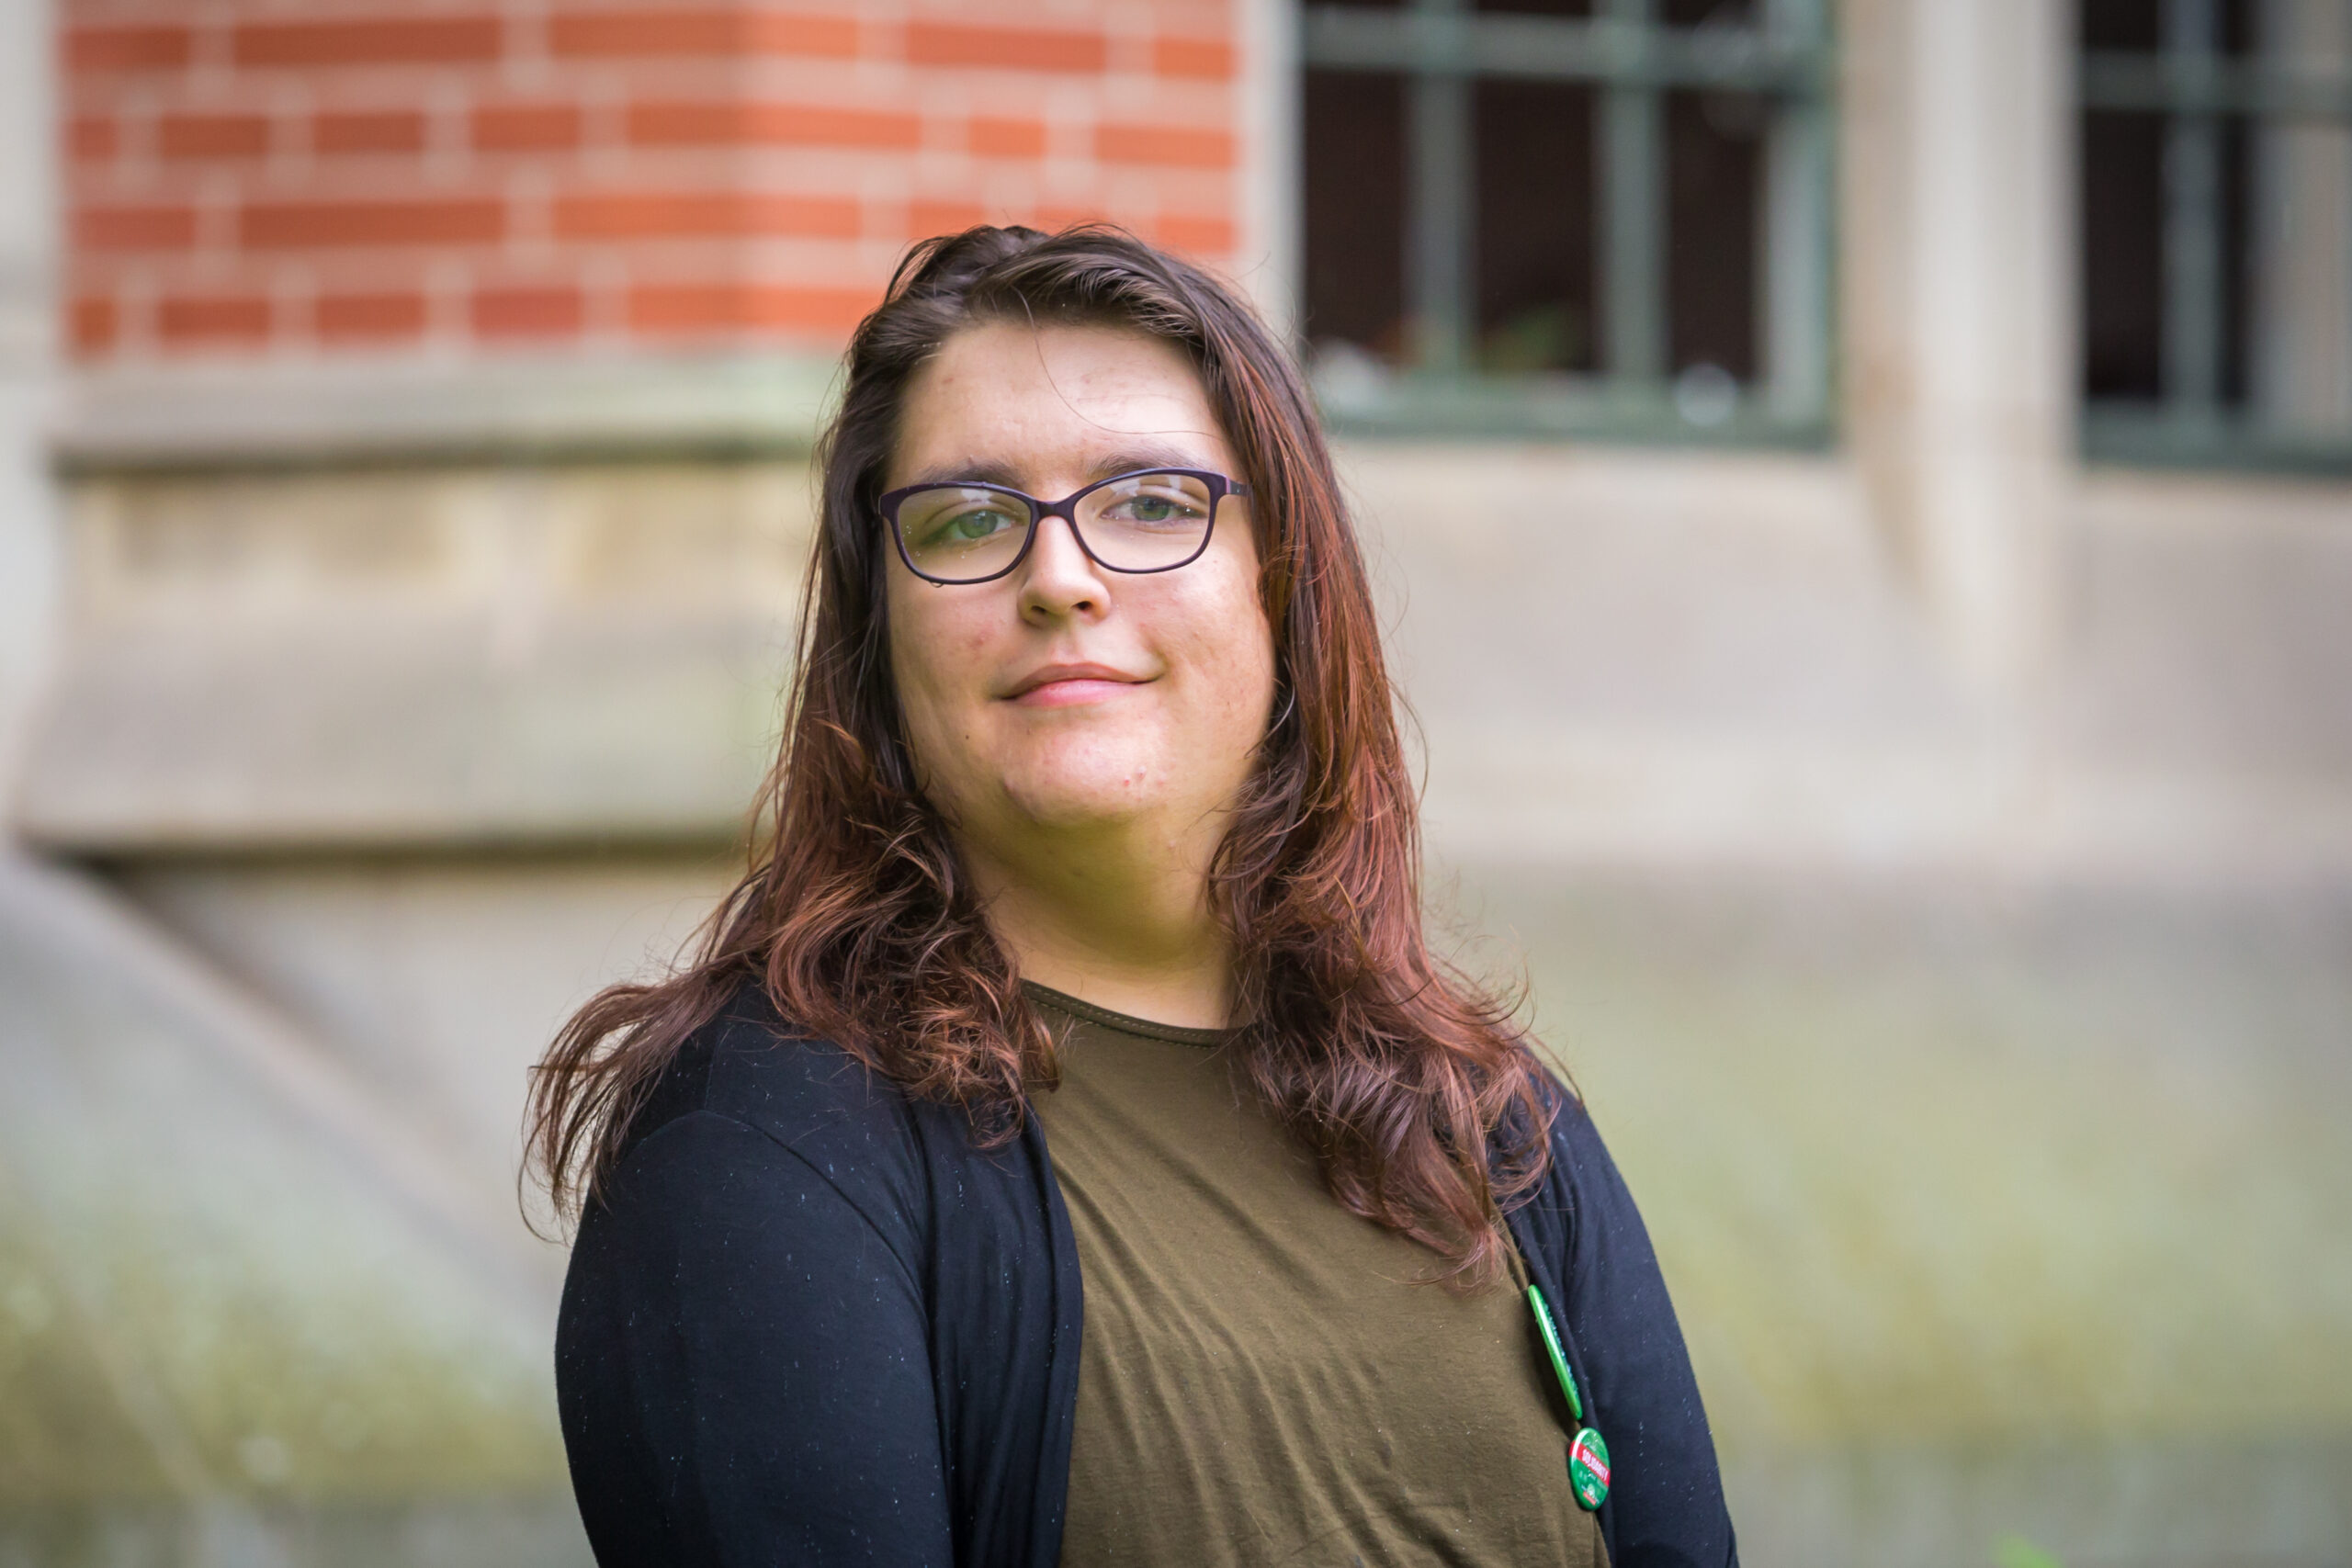 Official Green Party Portrait of Aimee Challenor